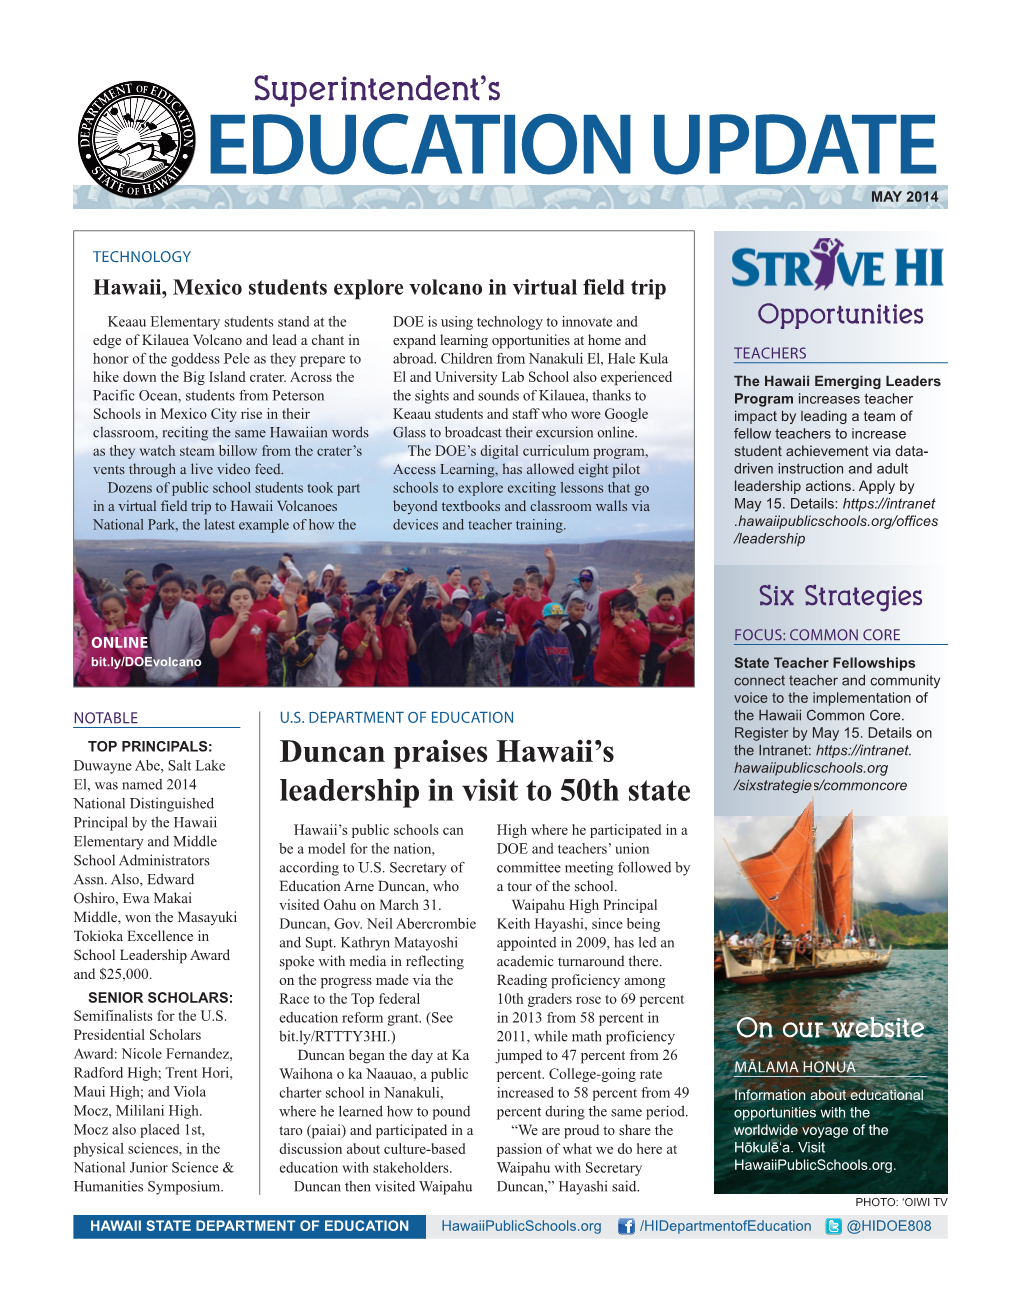 EDUCATION UPDATE May 2014